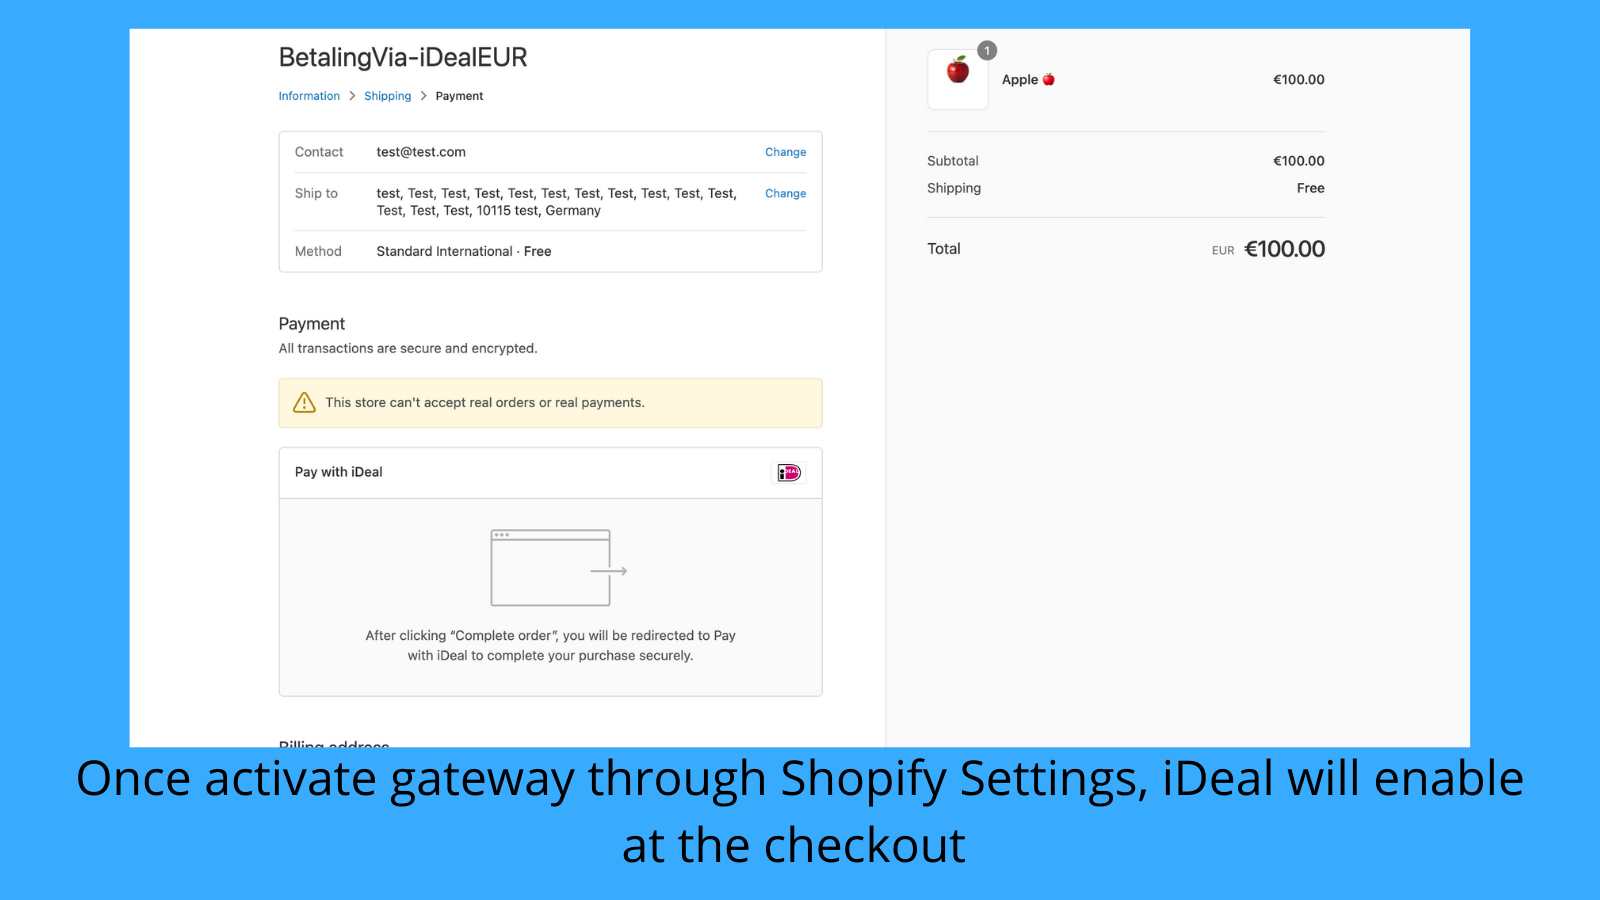 Enable iDeal through Shopify payment settings.